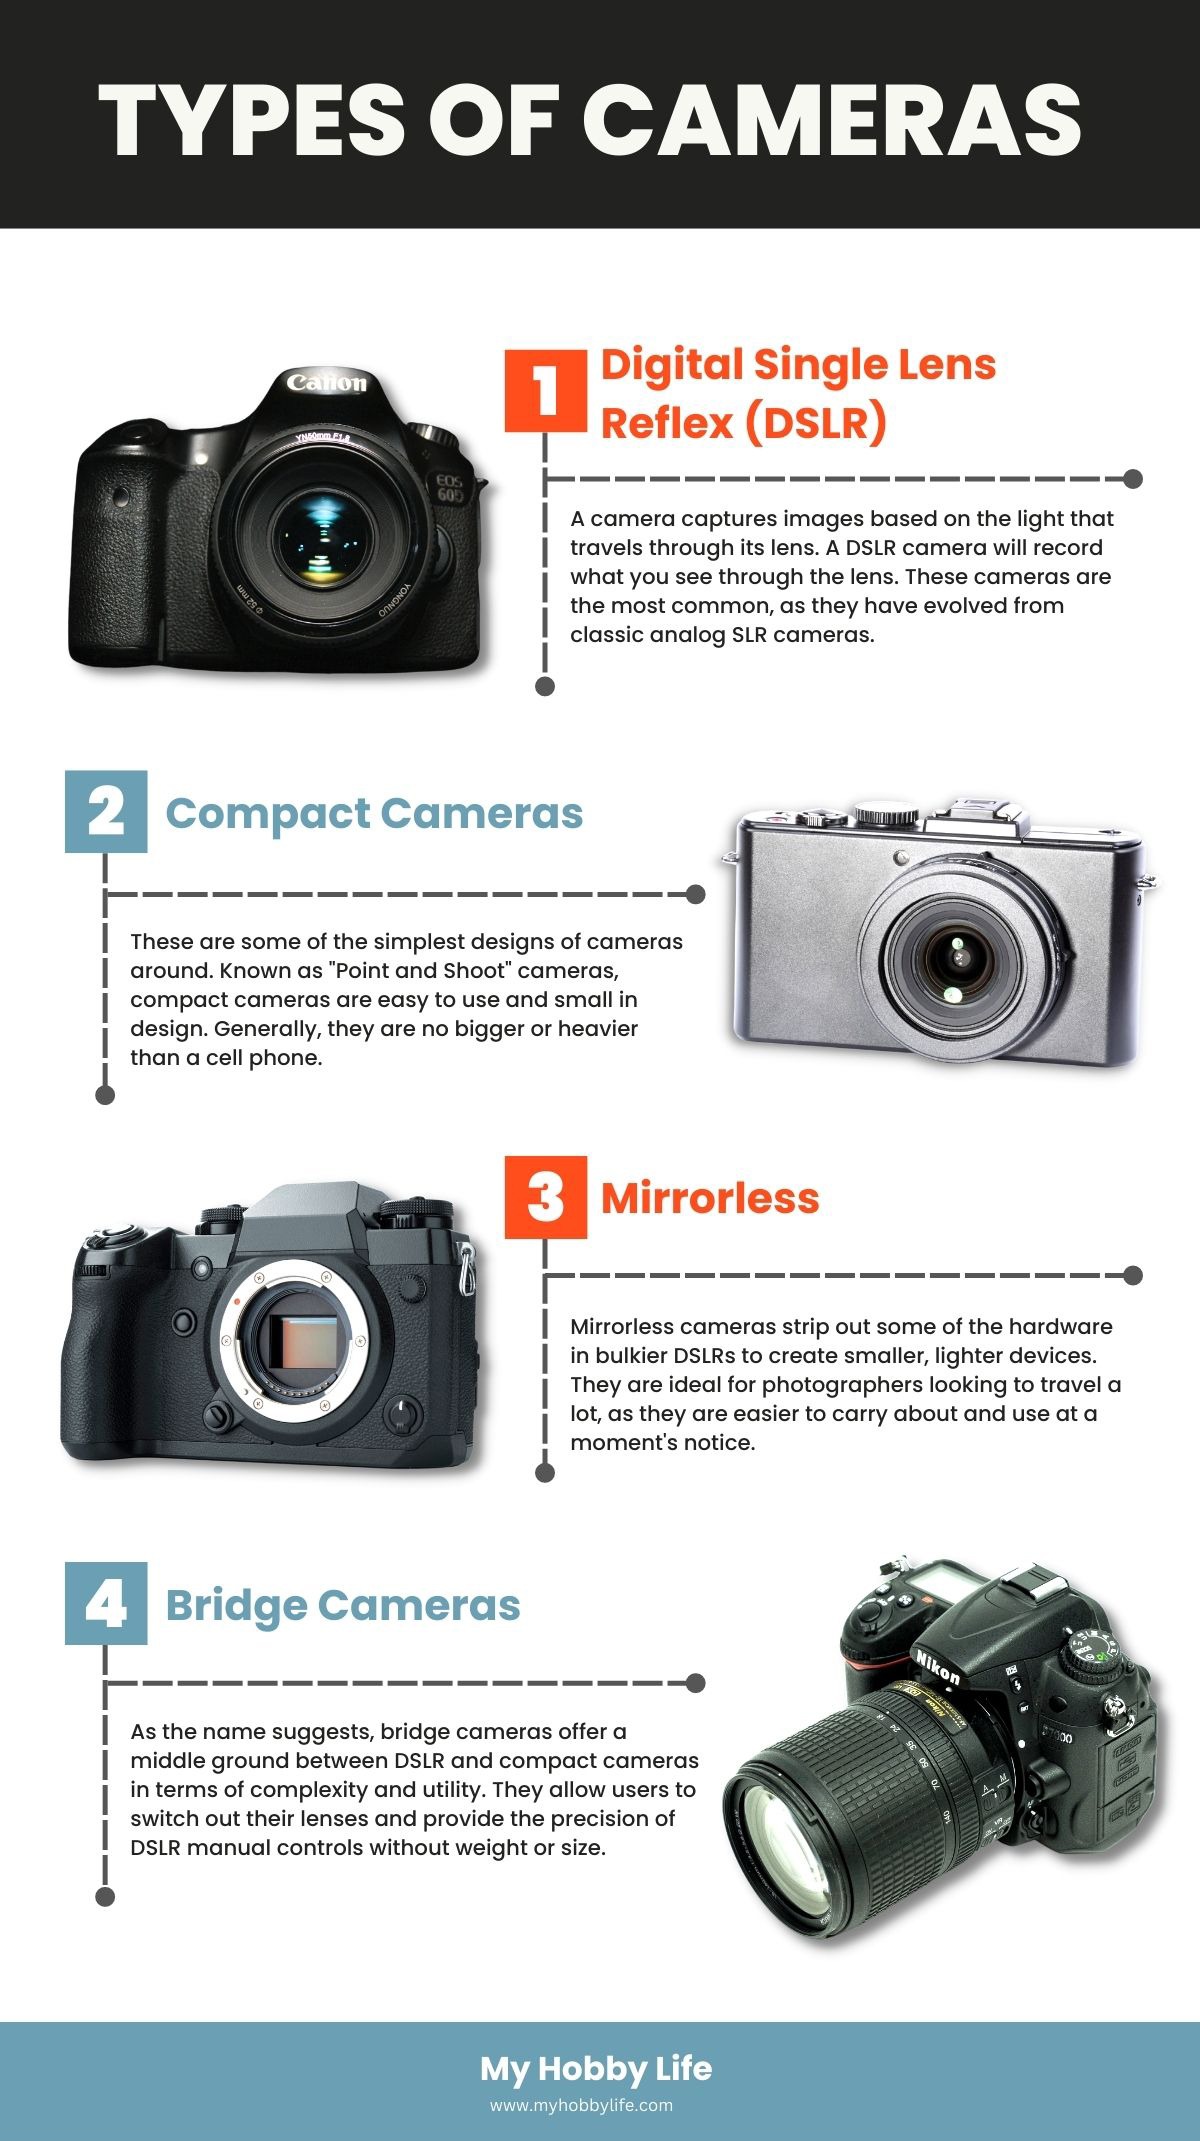 Different Types of Cameras